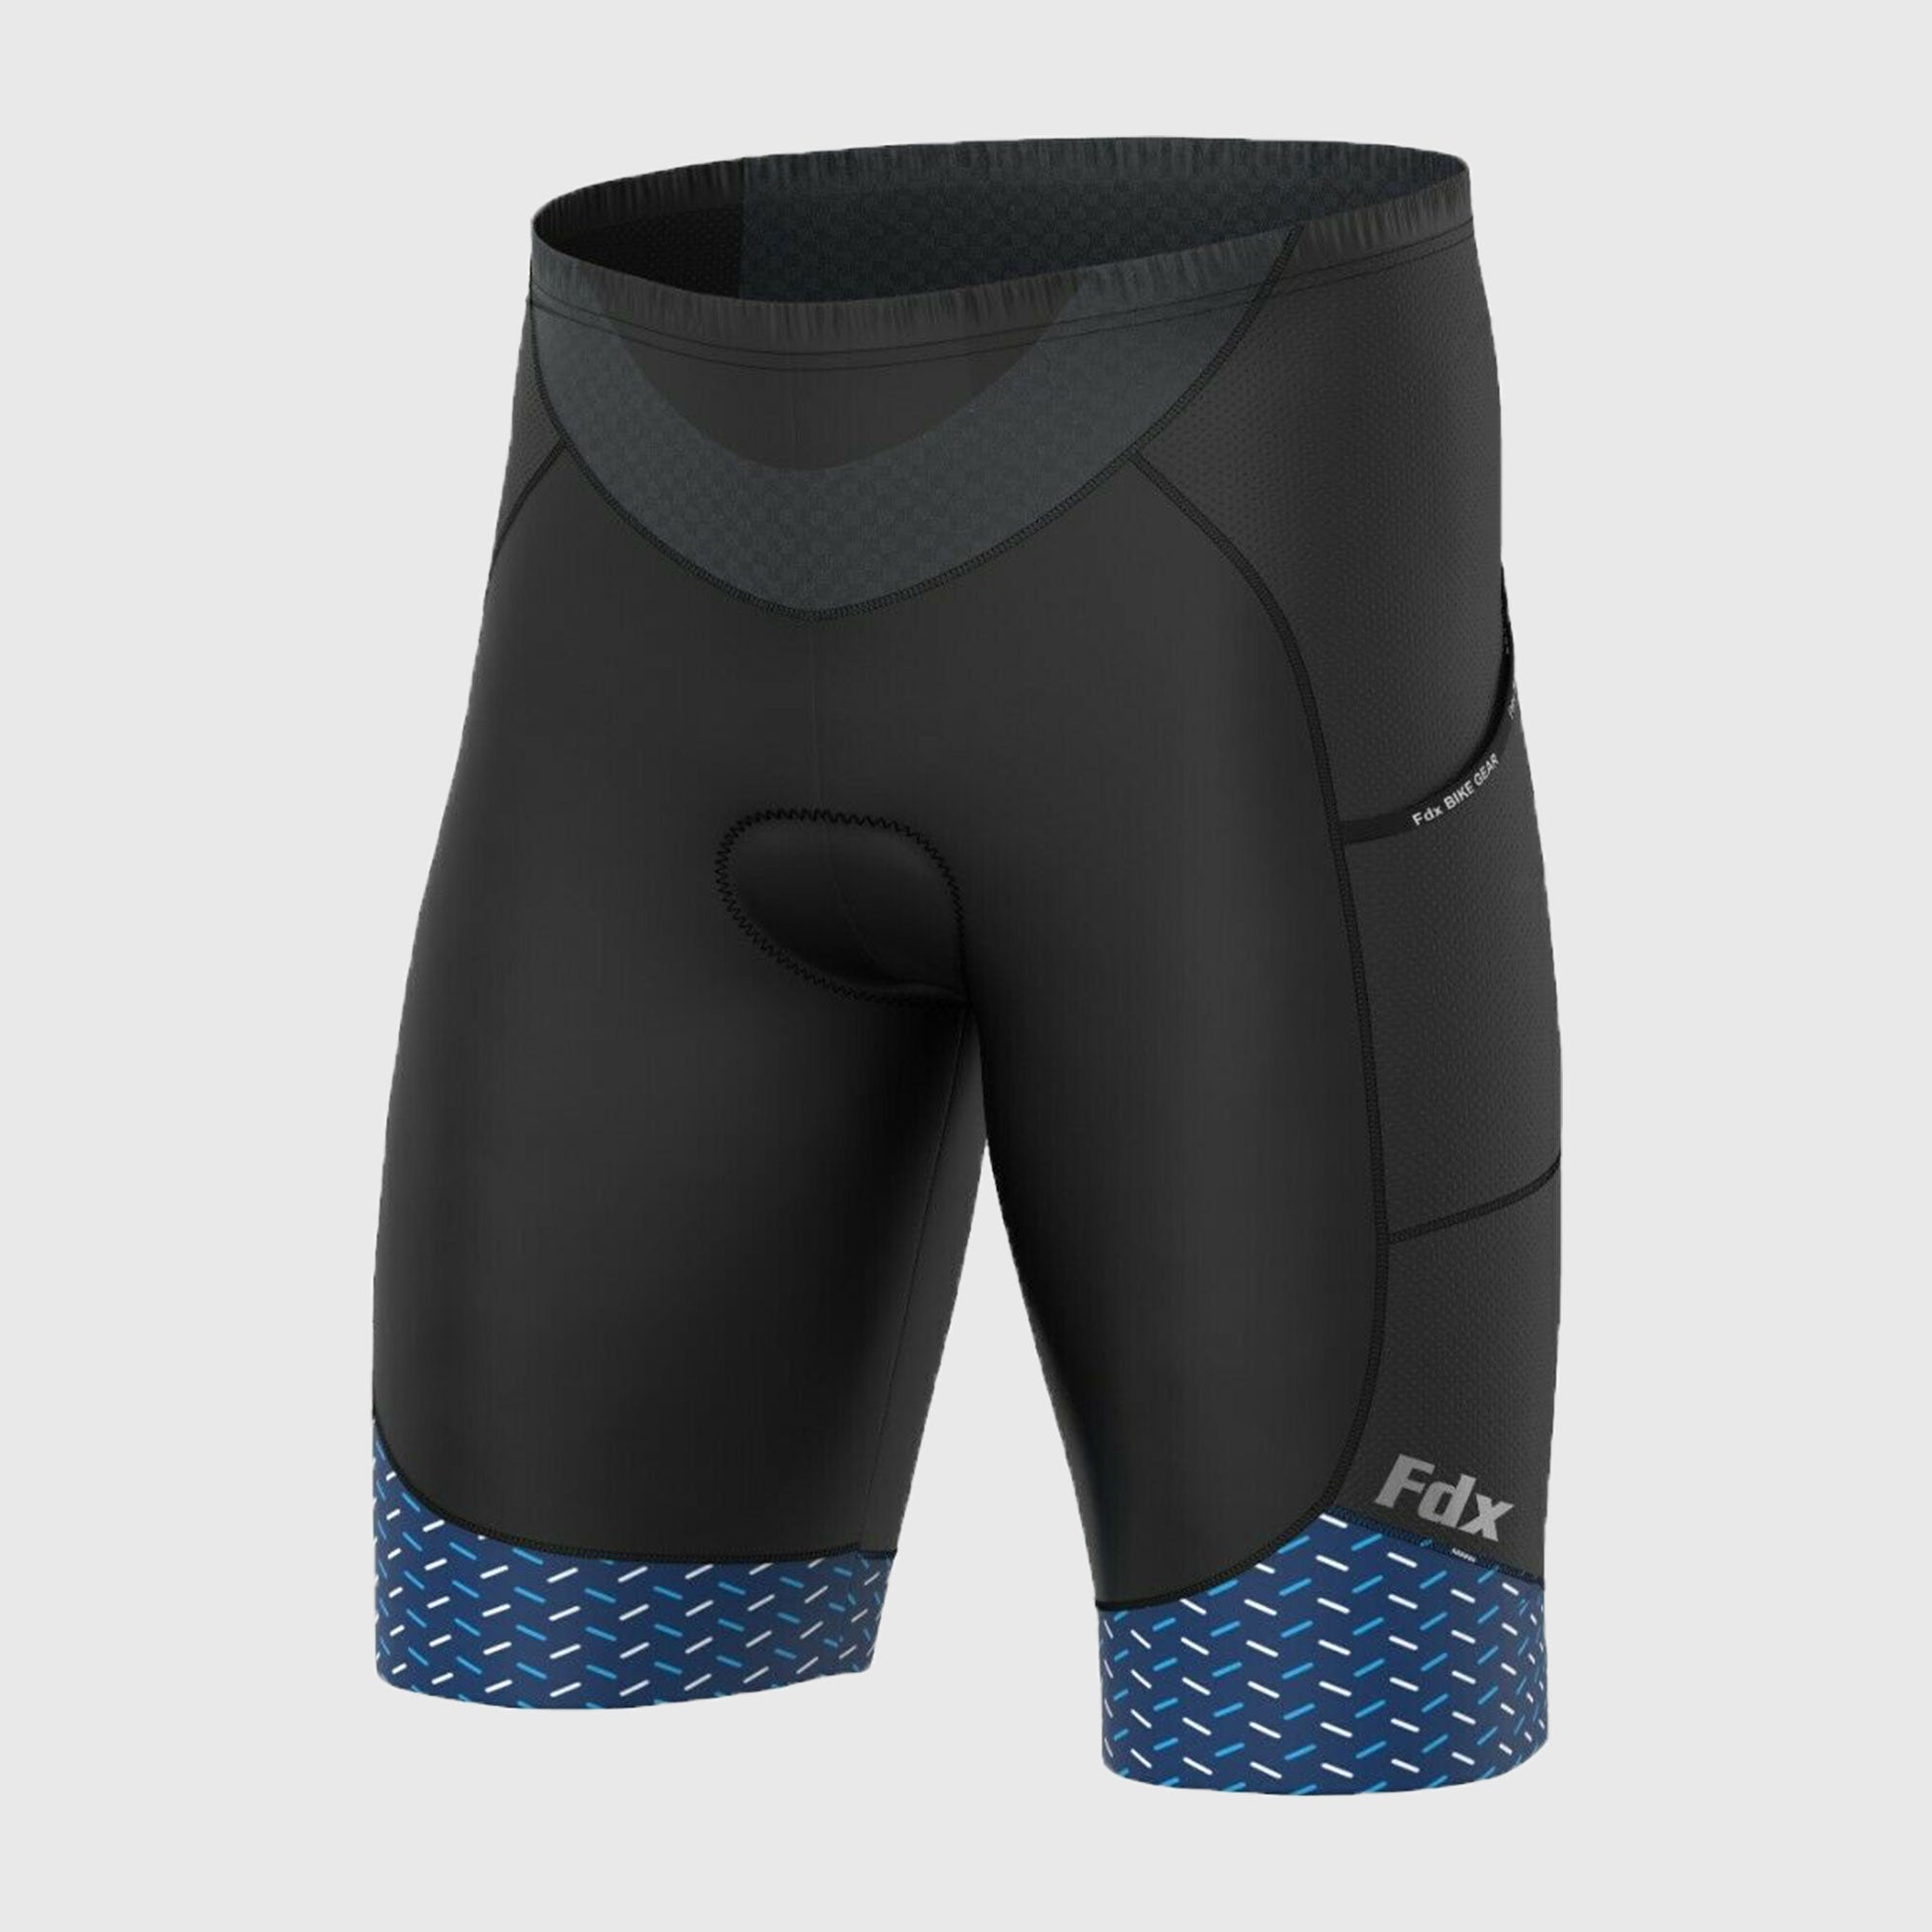 Fdx Essential Men's Padded Summer Cycling Shorts with Pockets